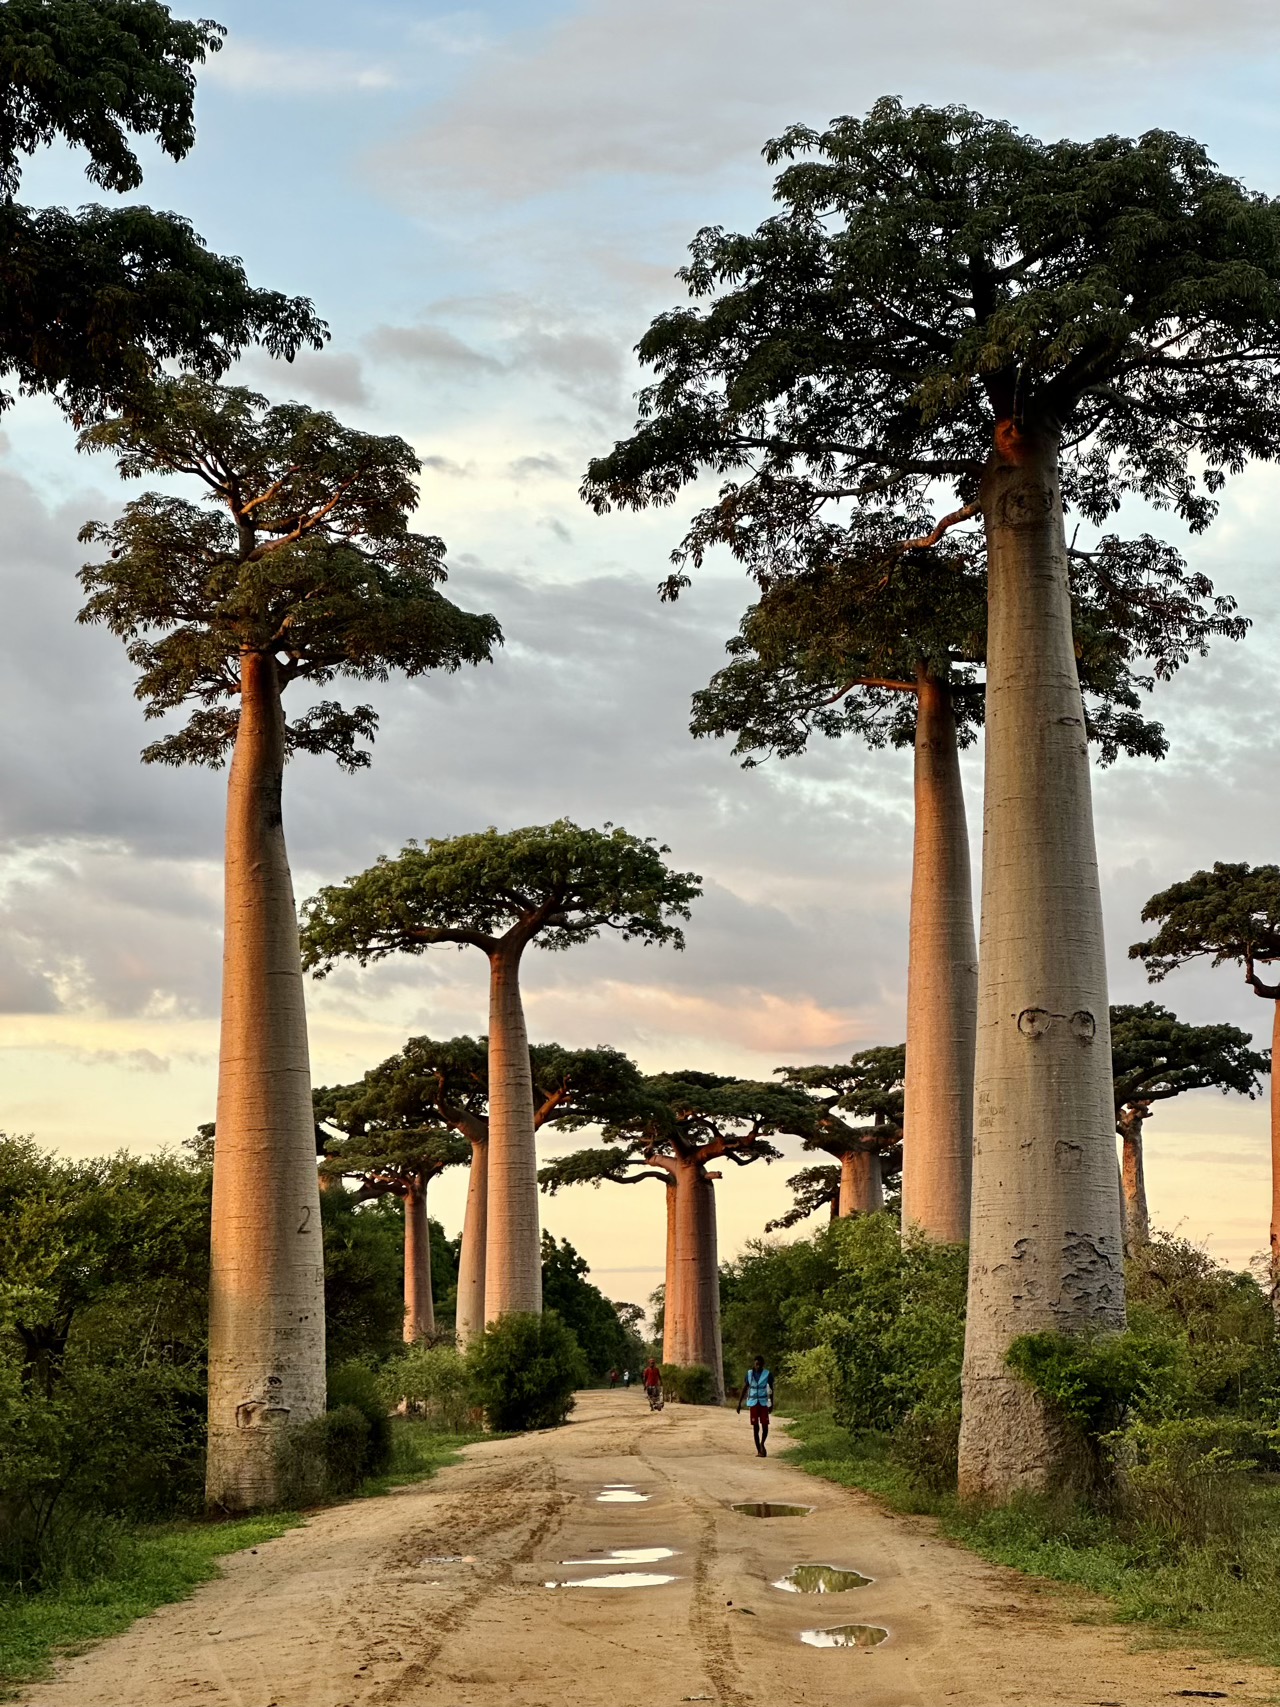 Sunrise at Avenue of the Baobabs